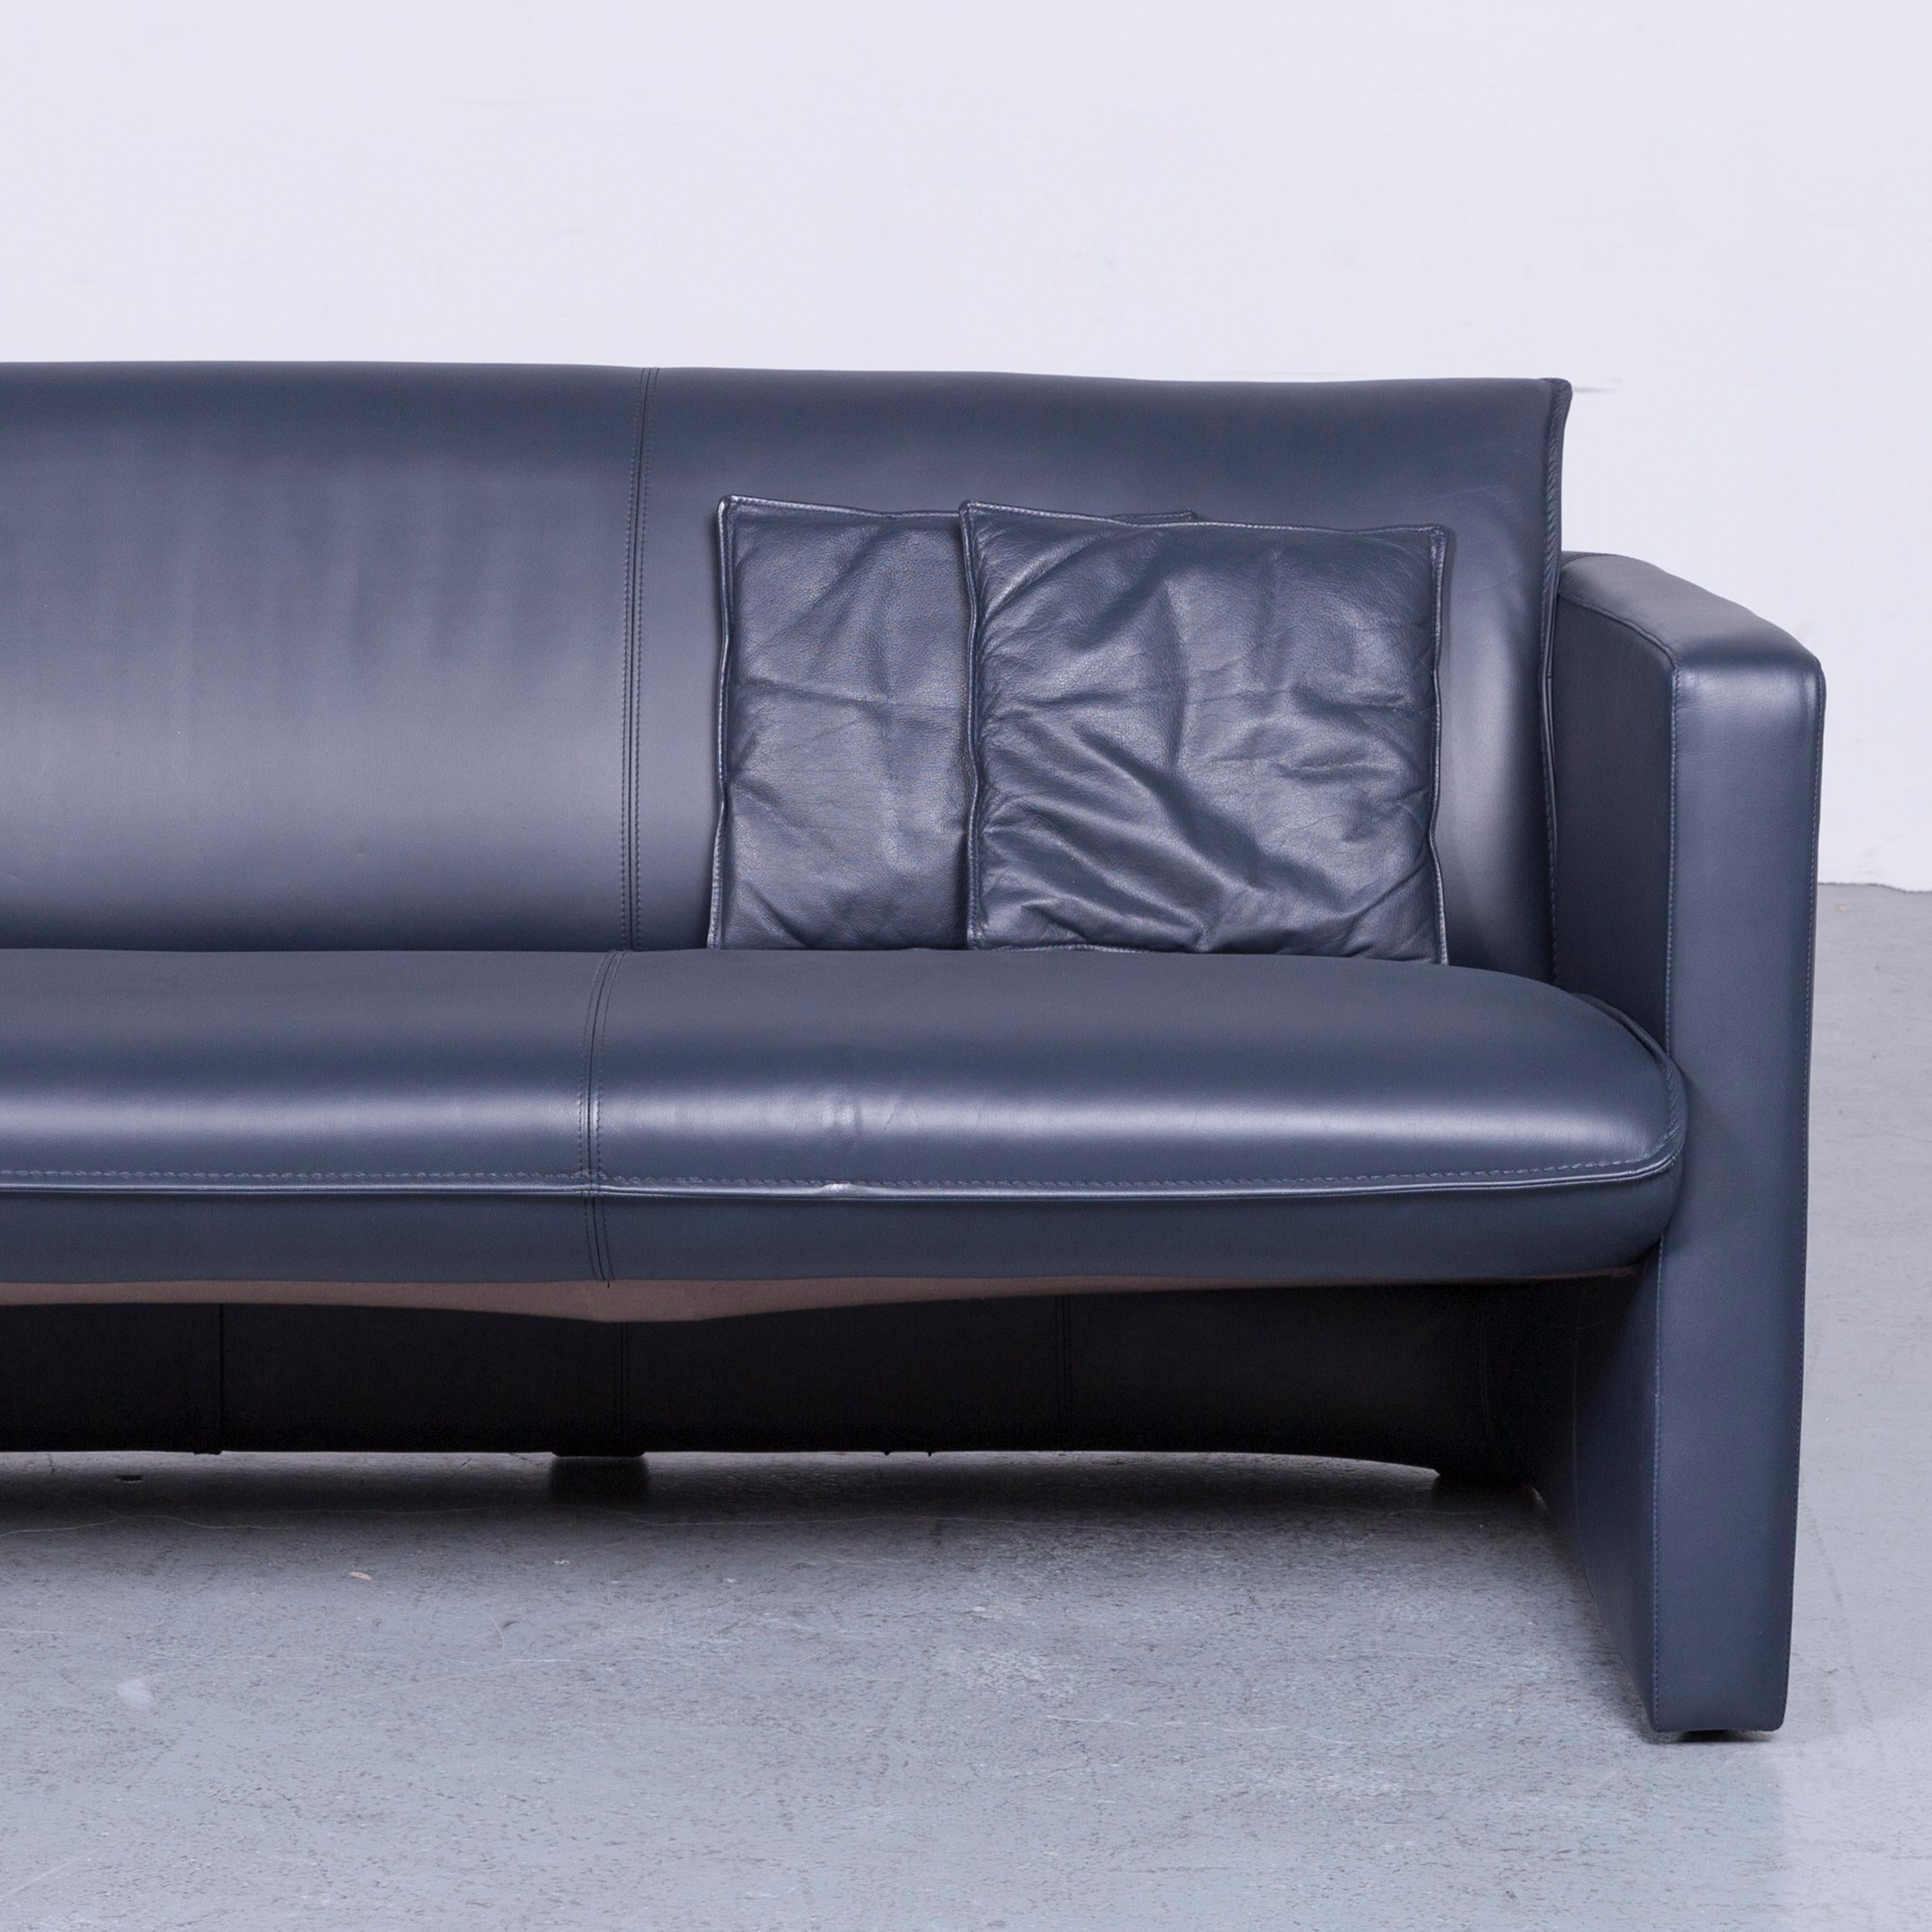 Leolux Designer Sofa Leather Blue Two-Seat Couch Modern In Good Condition For Sale In Cologne, DE